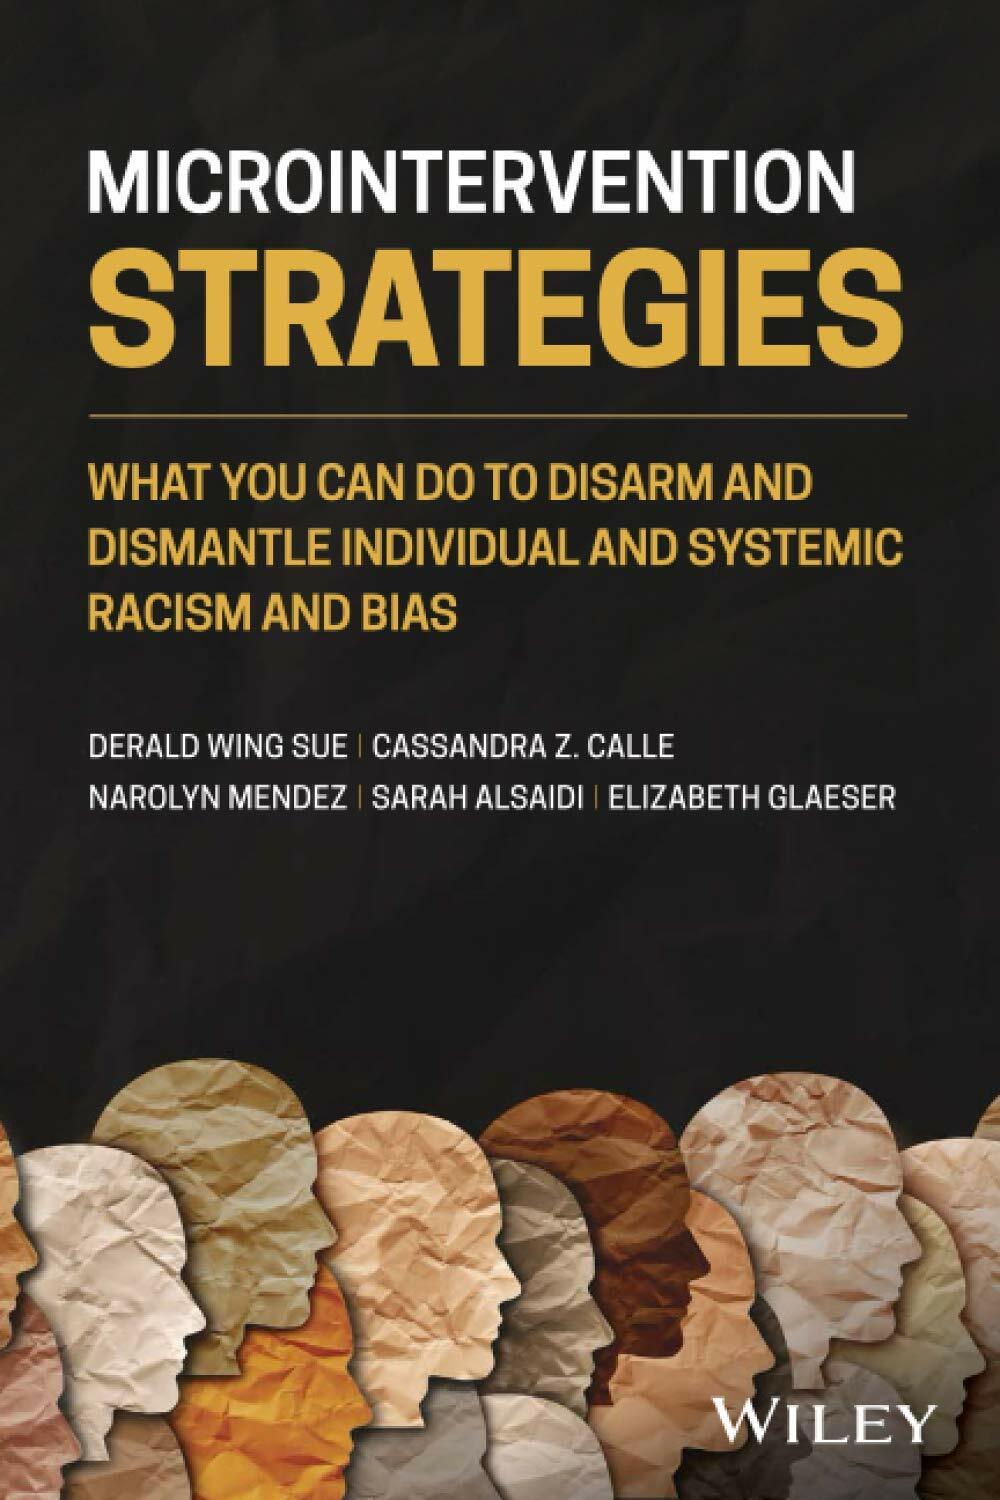 Microintervention Strategies: What You Can Do to Disarm and Dismantle Individual and Systemic Racism and Bias (Paperback)